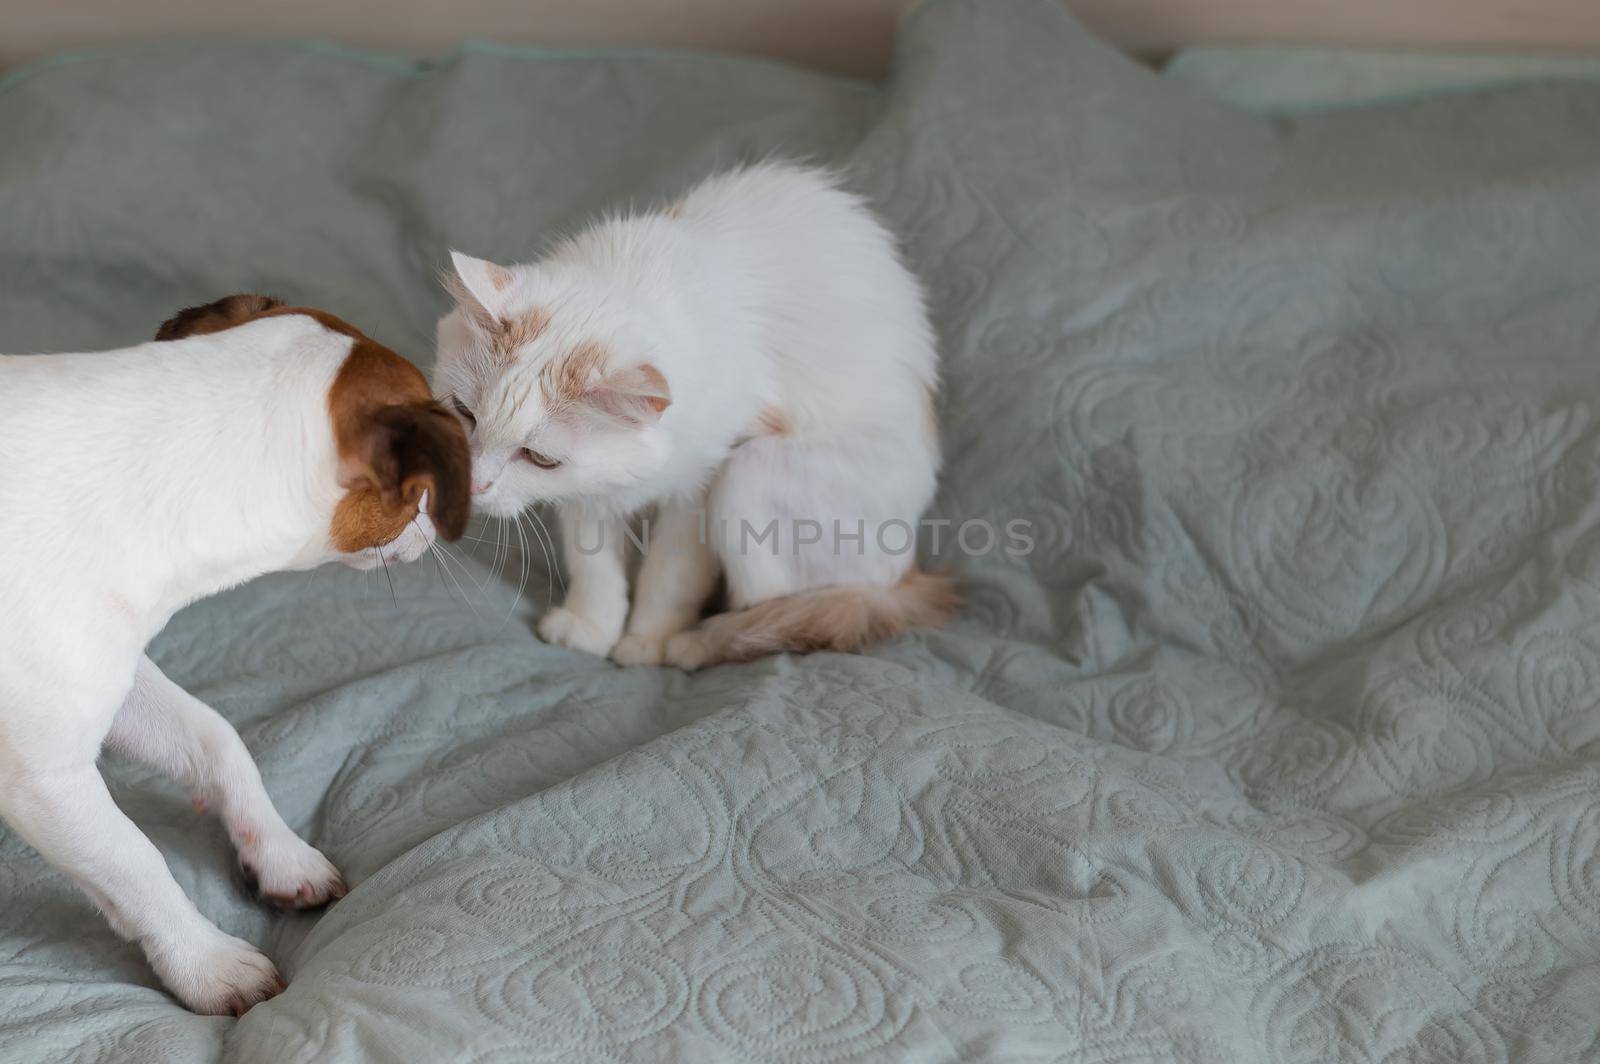 Jack russell terrier dog and irritated white cat on the bed. by mrwed54